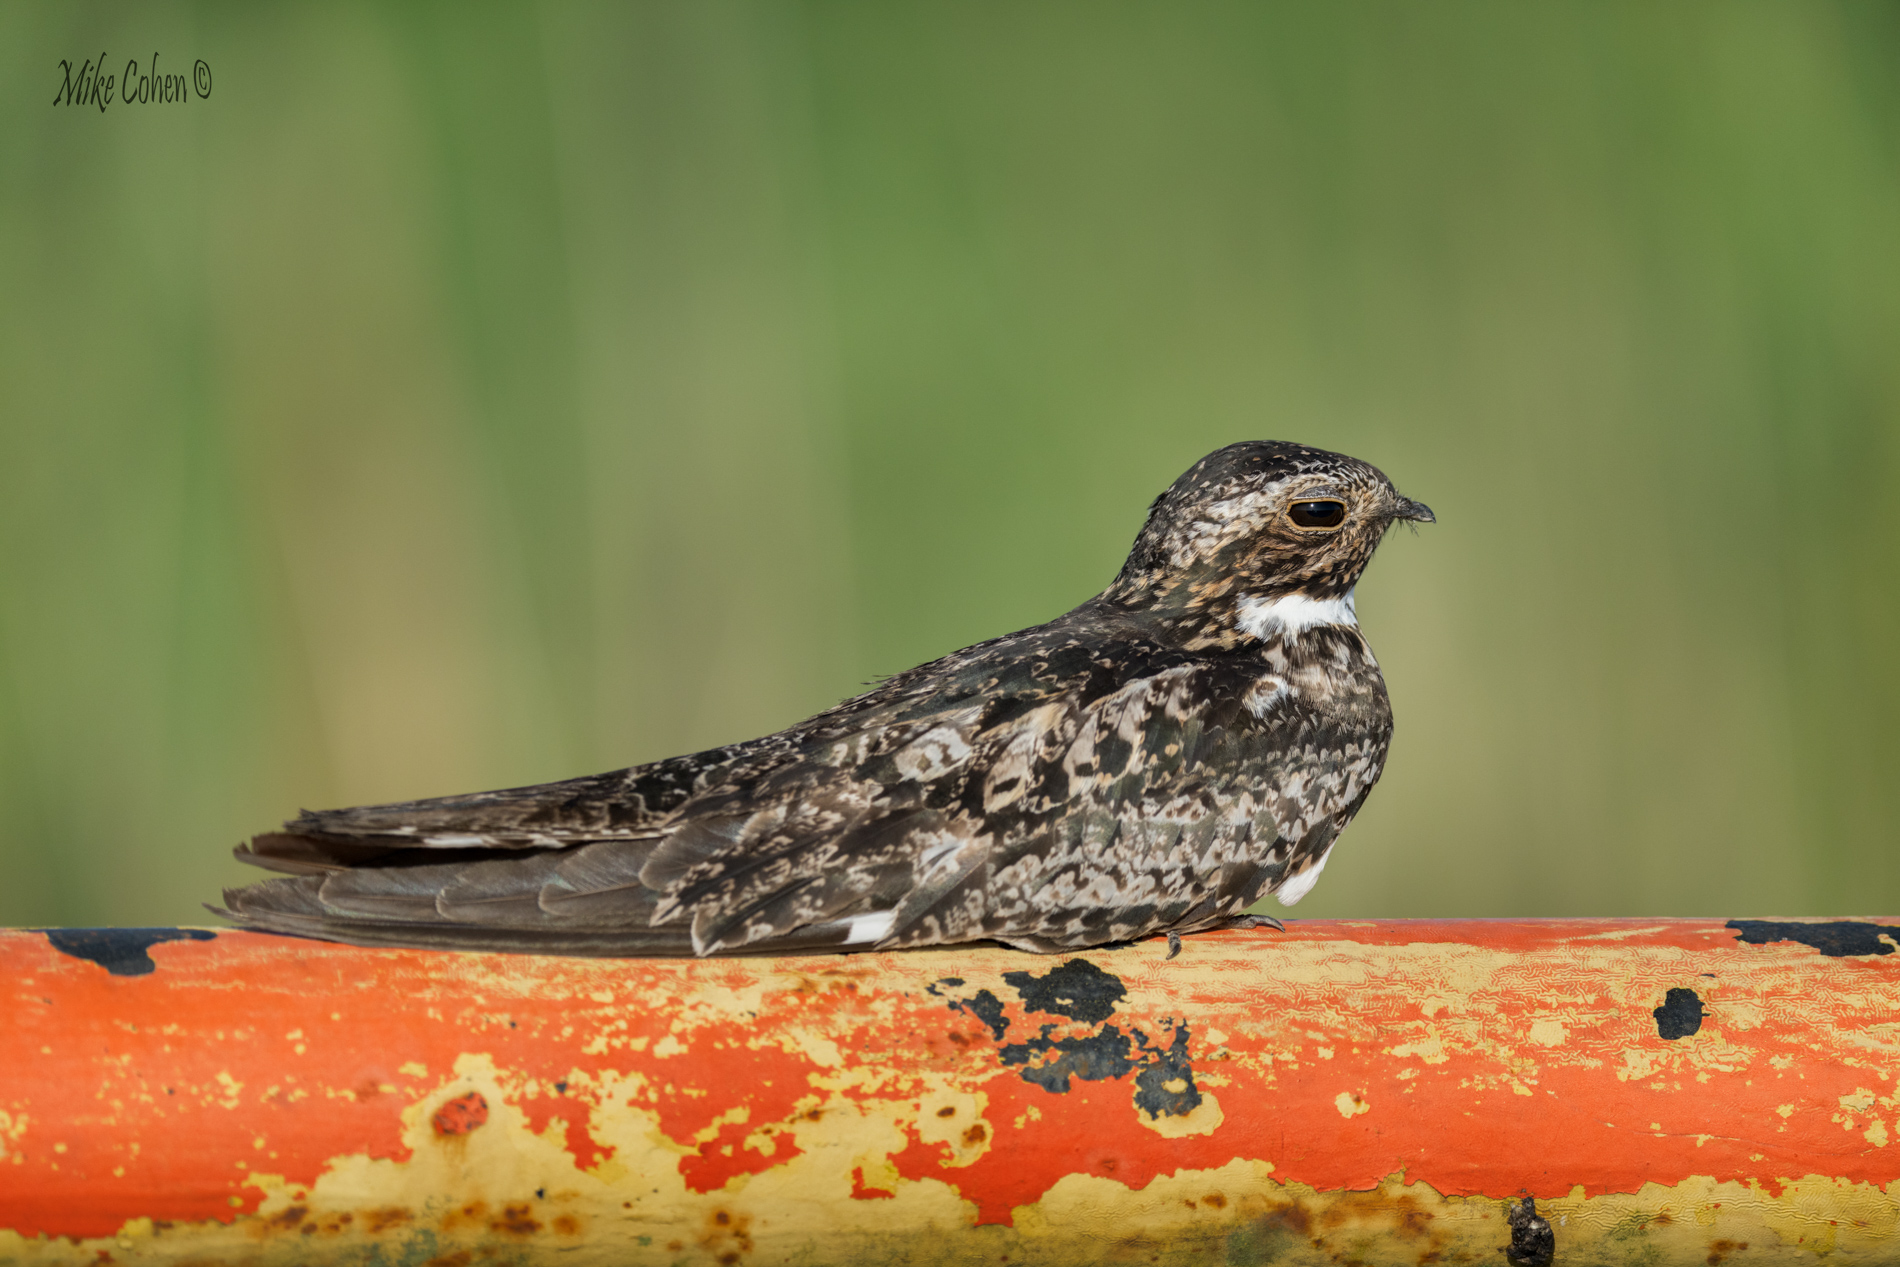 Common Nighthawk by Mike Cohen